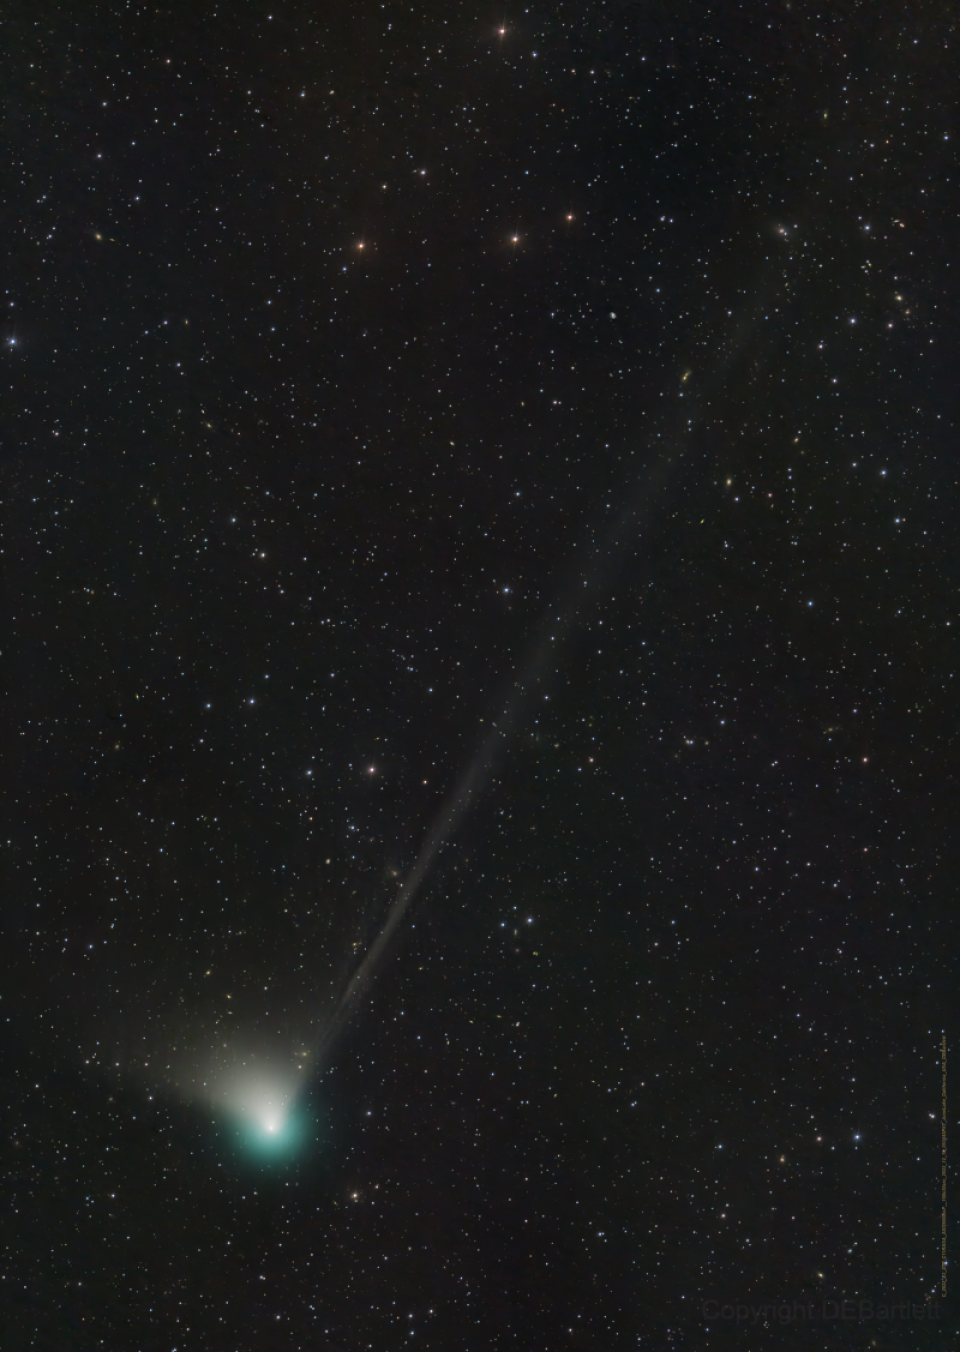 Comet That Last Flew Past Earth during Neanderthal Era Is Set To Return to Night Sky in the New Year